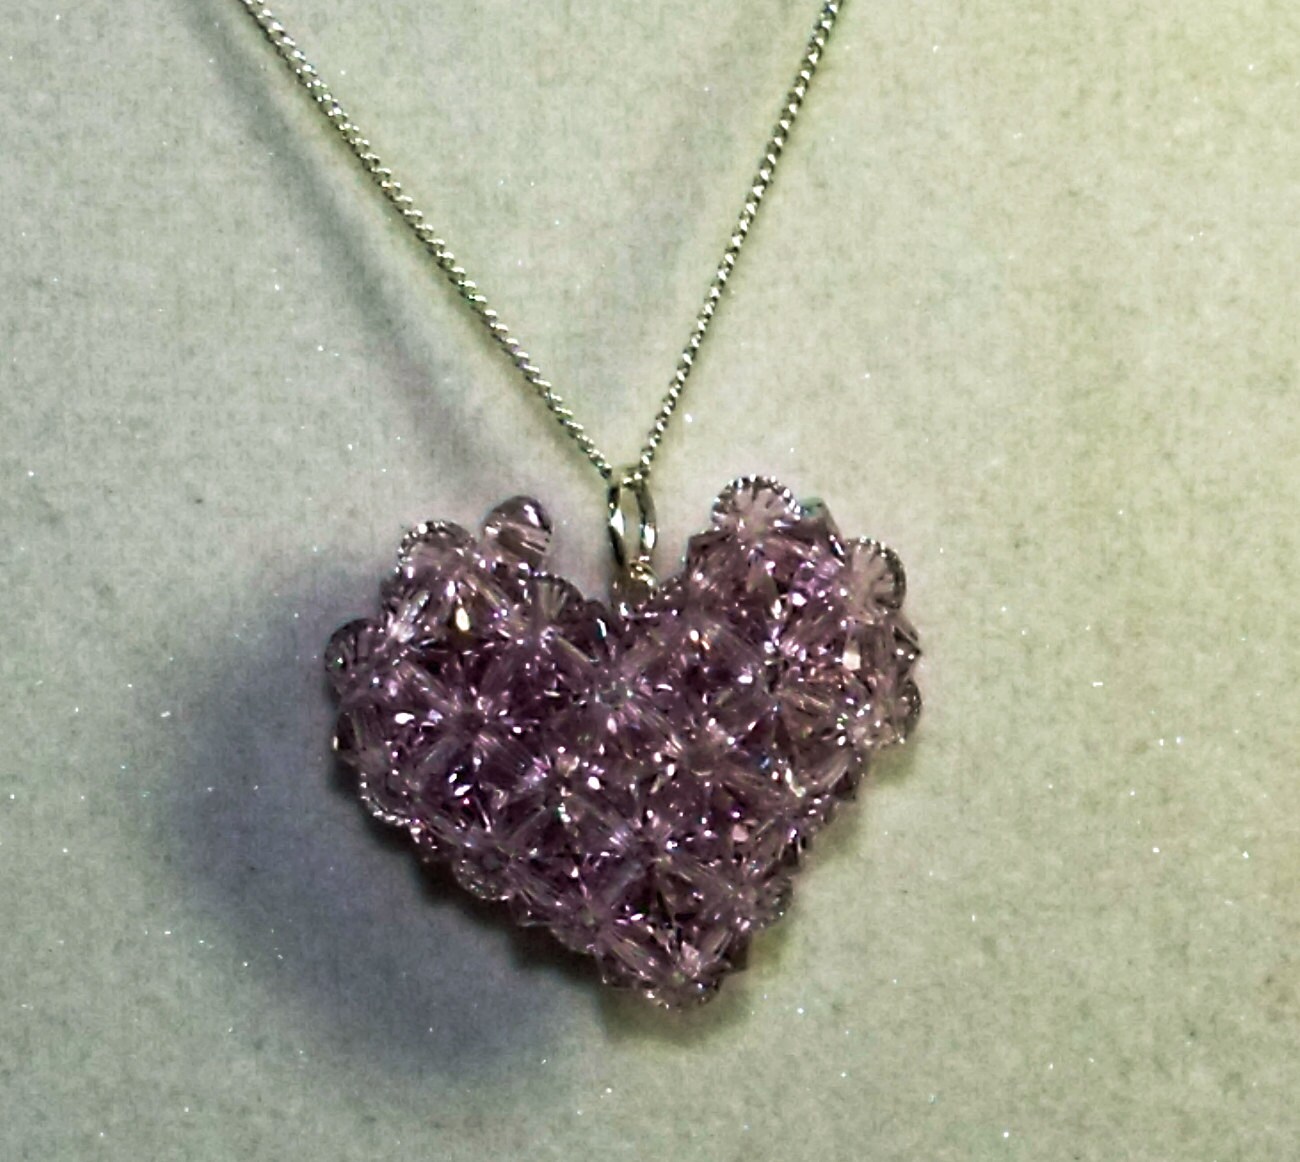 Swarovski Crystal Puffed Heart Necklace Violet with Sterling